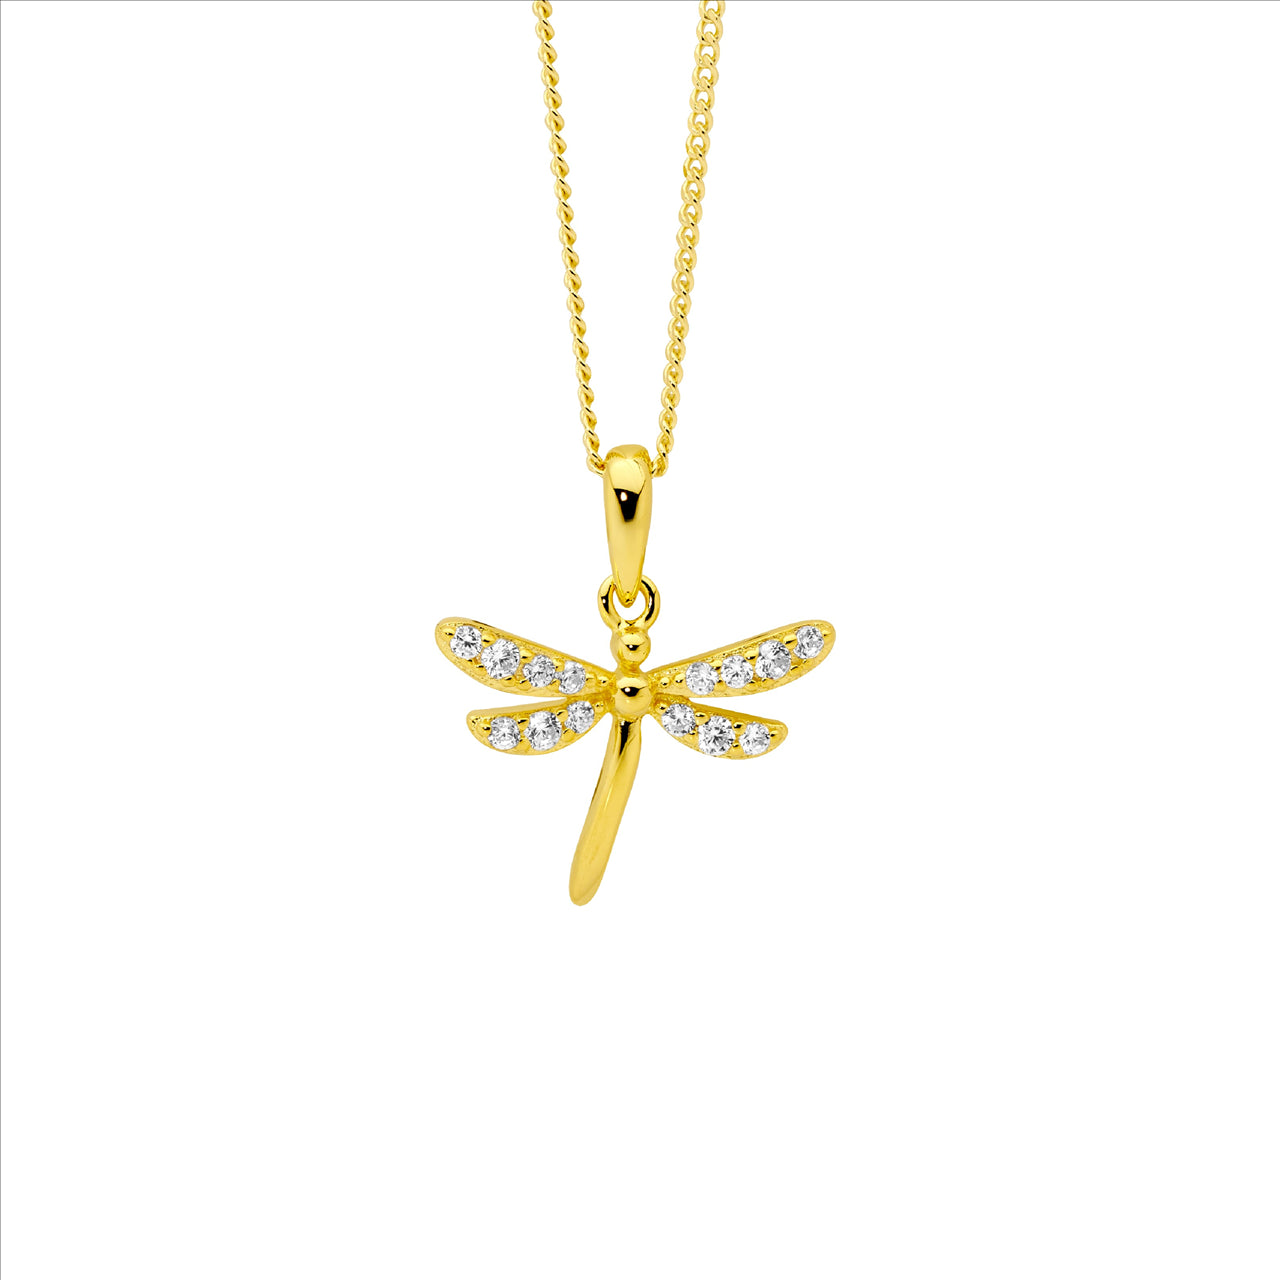 Dragonfly Necklace set with Cubic Zirconias - Yellow Gold.